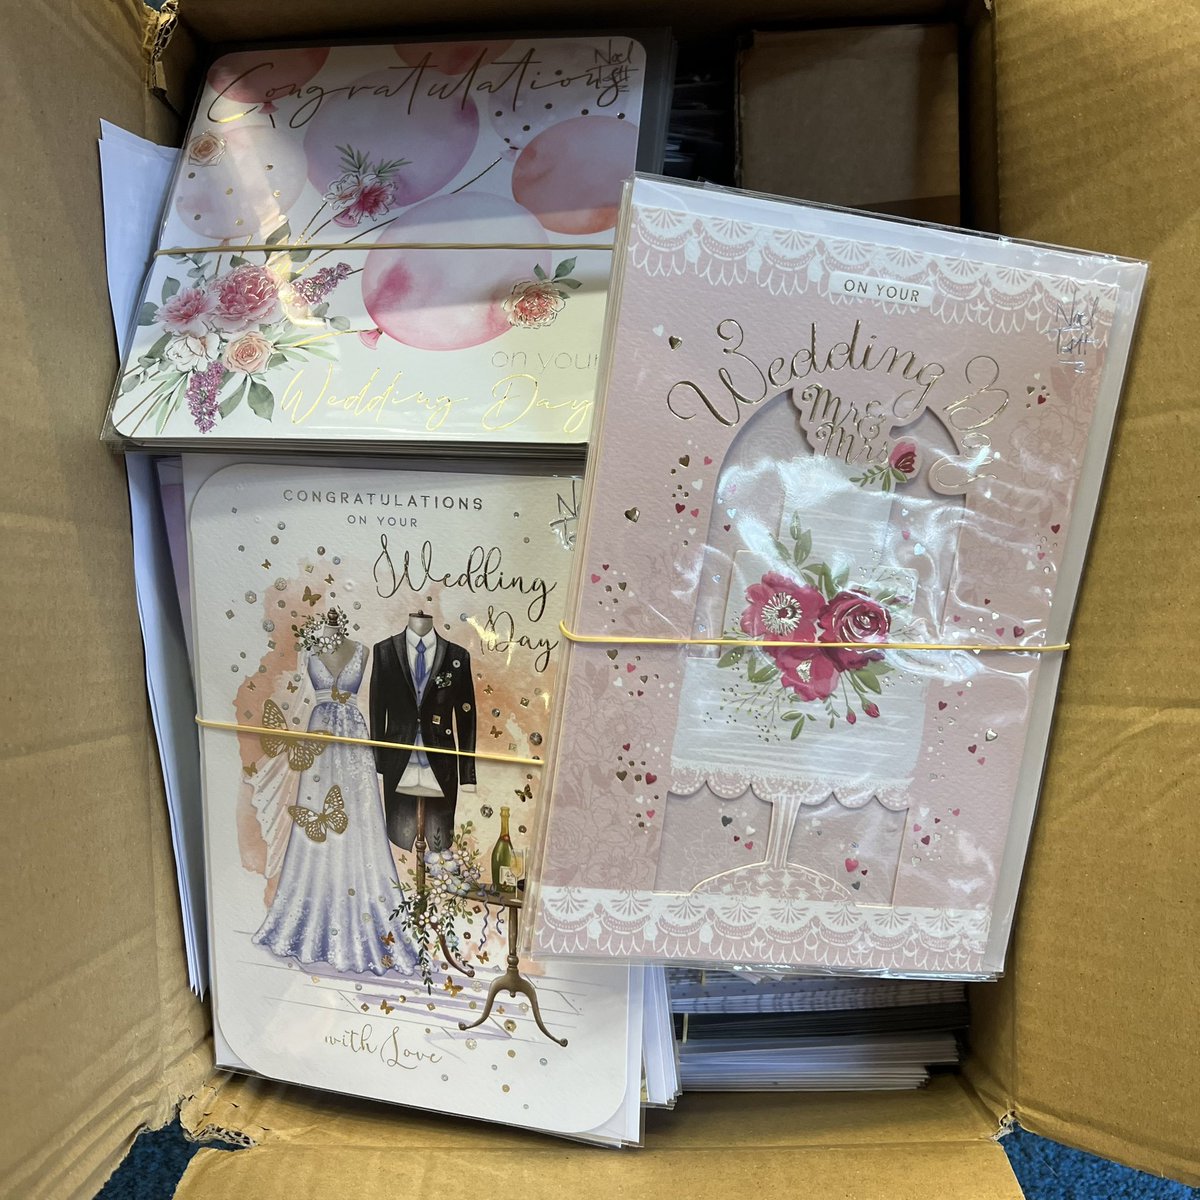 A late Tuesday delivery at #thecandleshopatmitchells. So what’s in the box 🤔🤔 !!!!!! Looks like wedding season cards have arrived from @NoelTattGroup. More photos to follow later, need to get them on the spinners 🥵🥵🥵. @bigtalluk @REDSJEWELS1 @DDCrochetDesign @MHHSBD